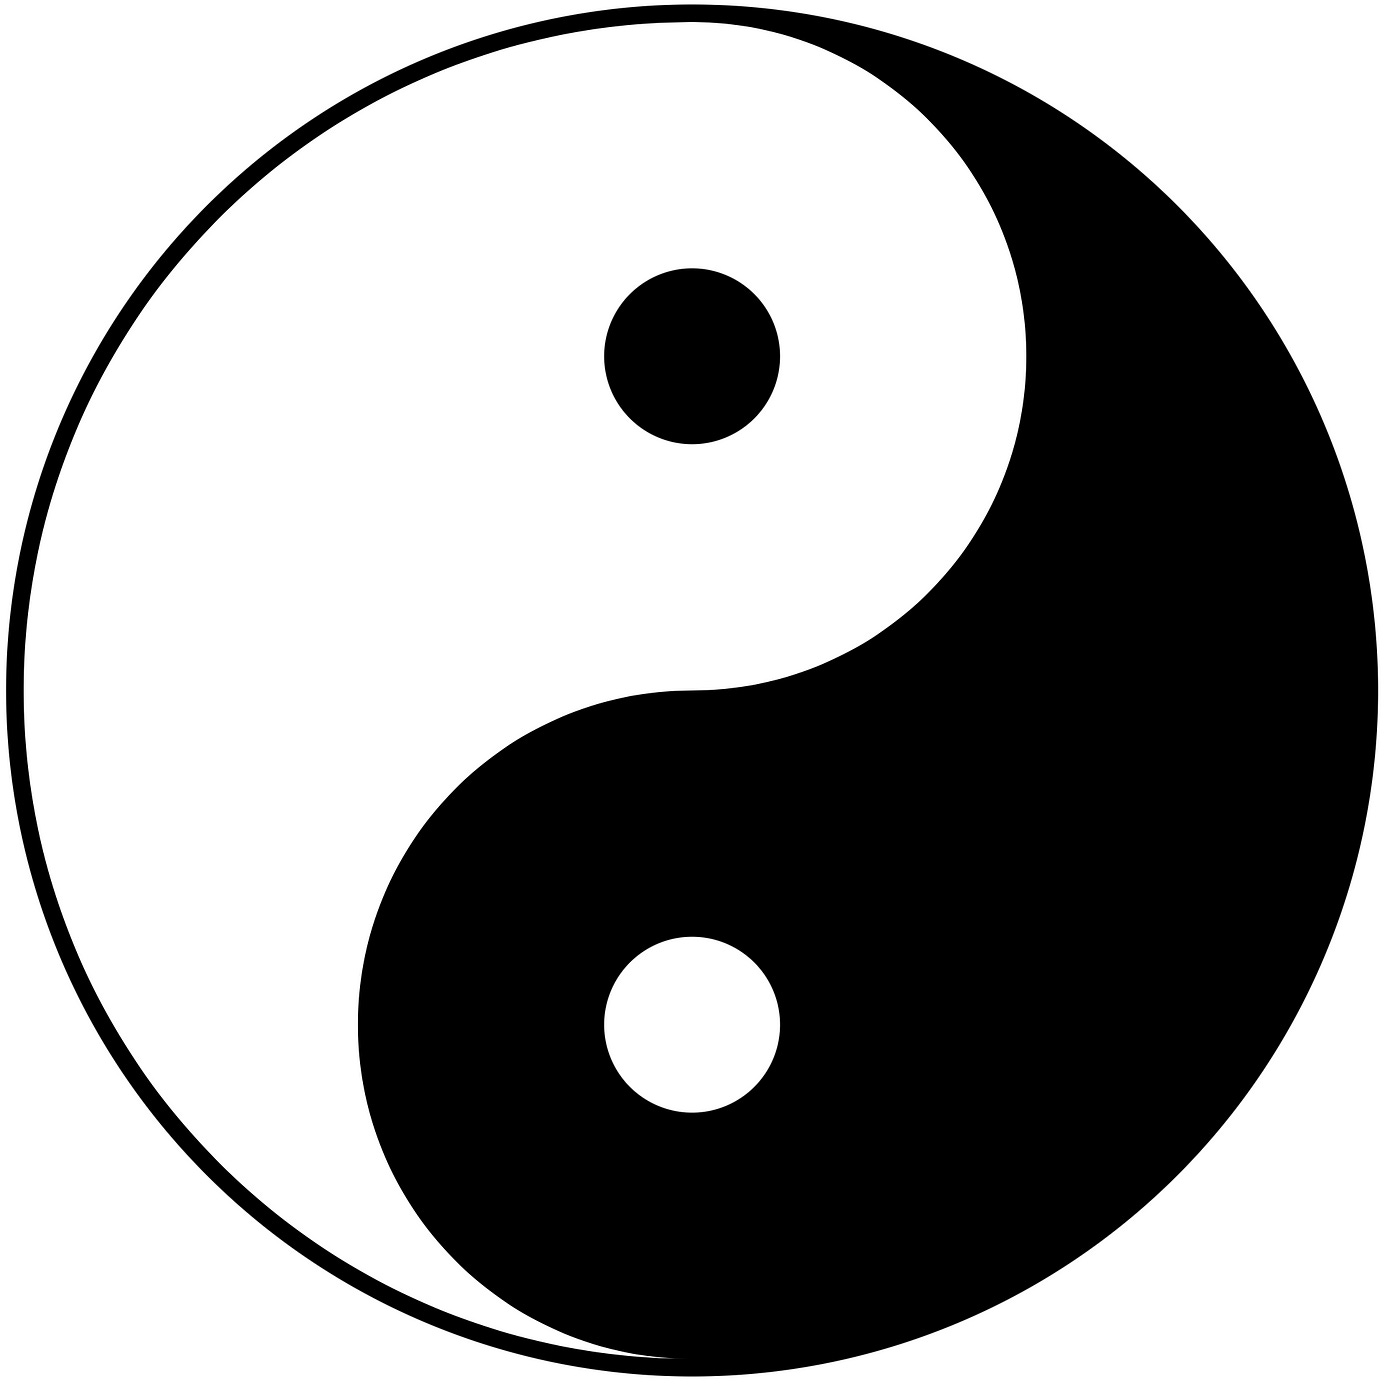 Our Lives Seen Through the Lens of Yin and Yang | by ...